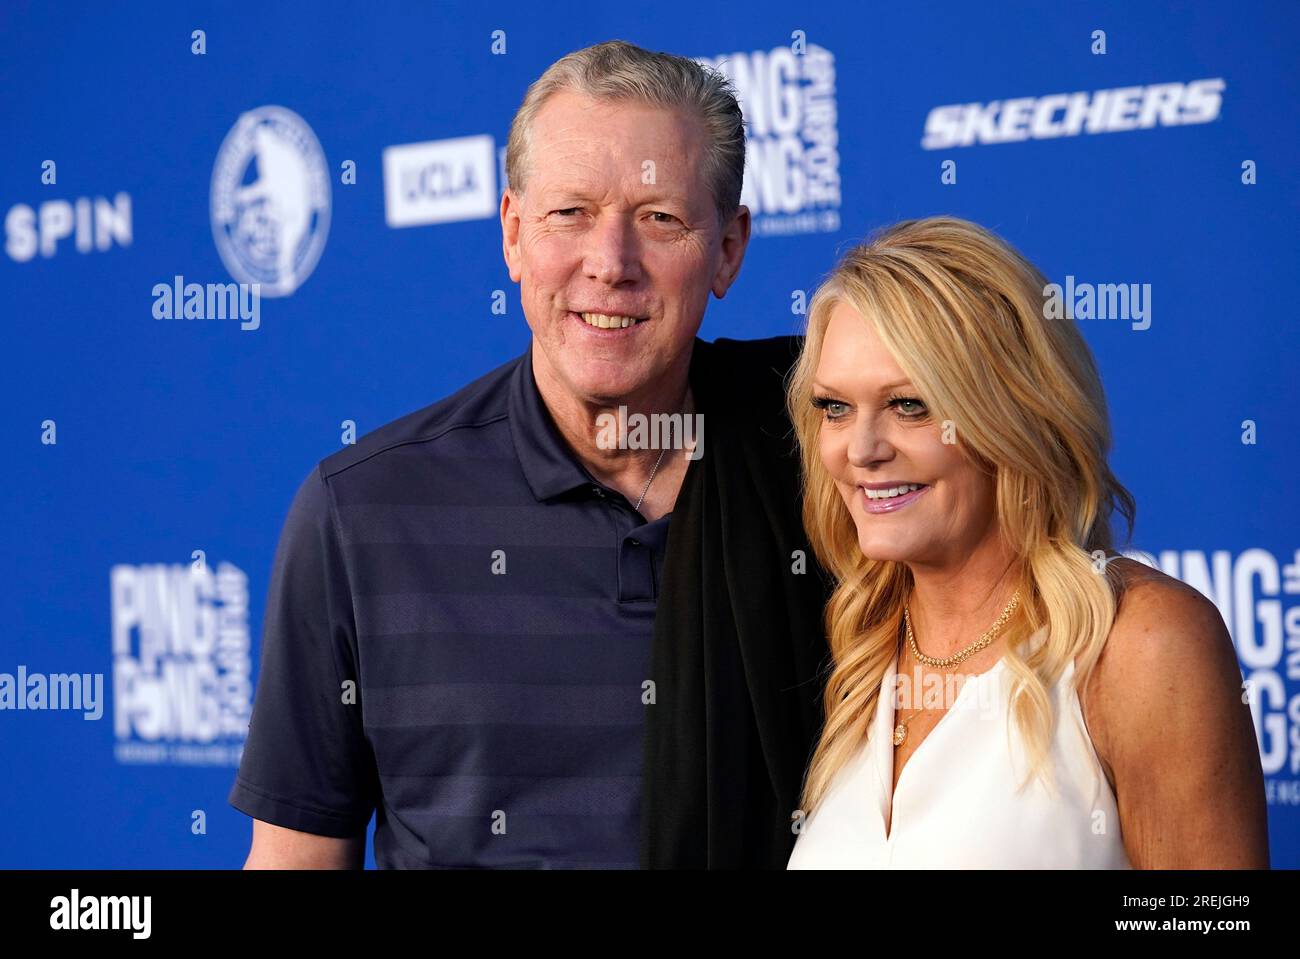 Orel Hershiser and his wife Dana Deaver pose together at the 10th